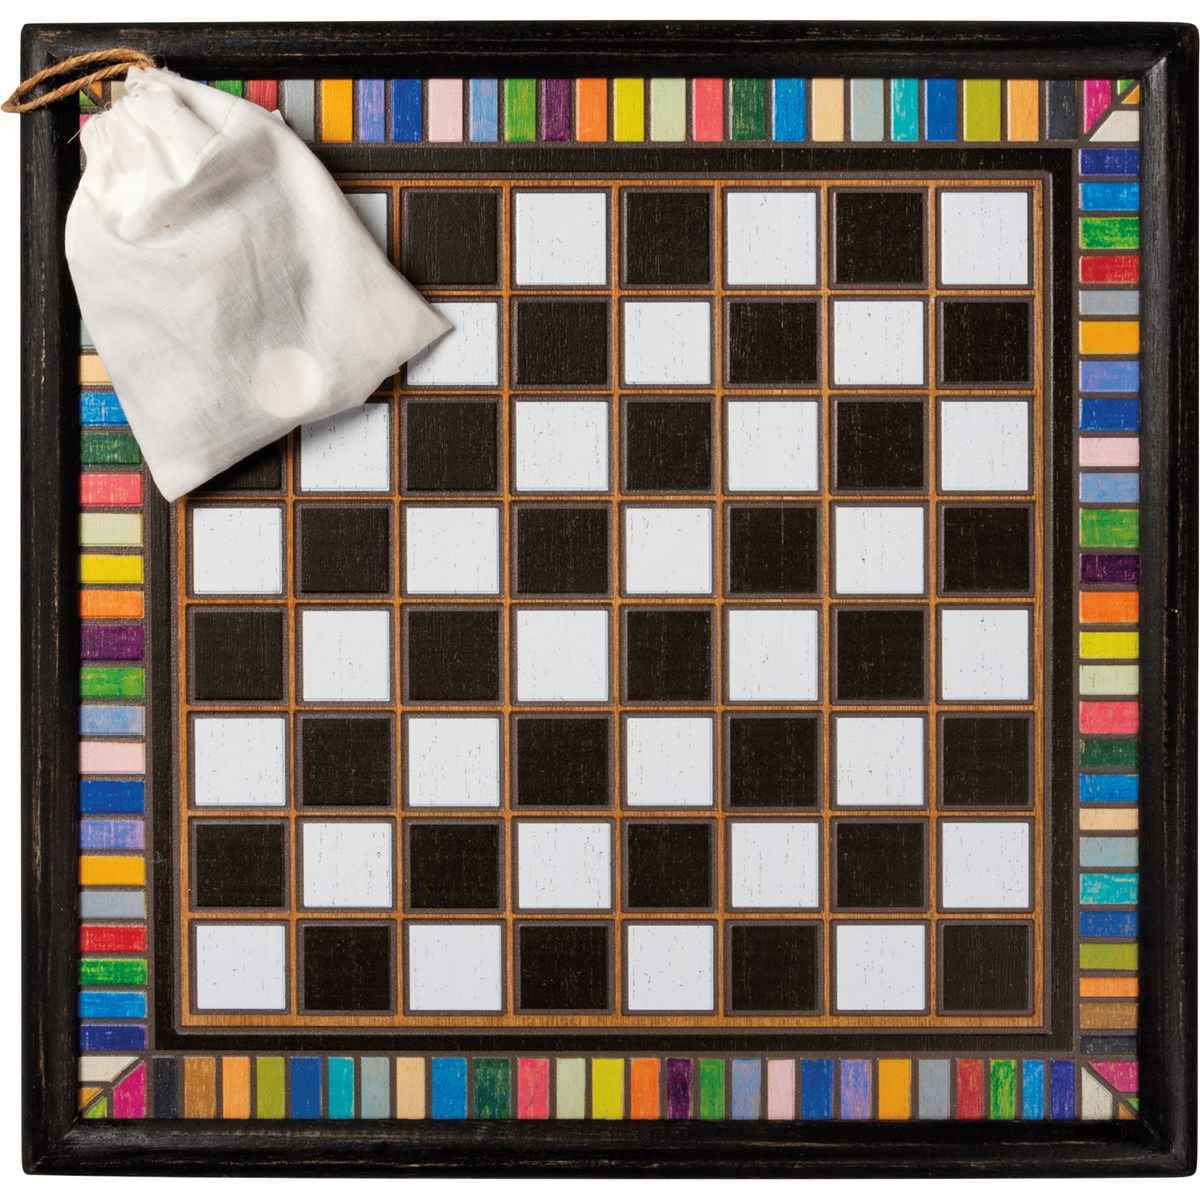 Checkers Wall Game - Wood, Cotton